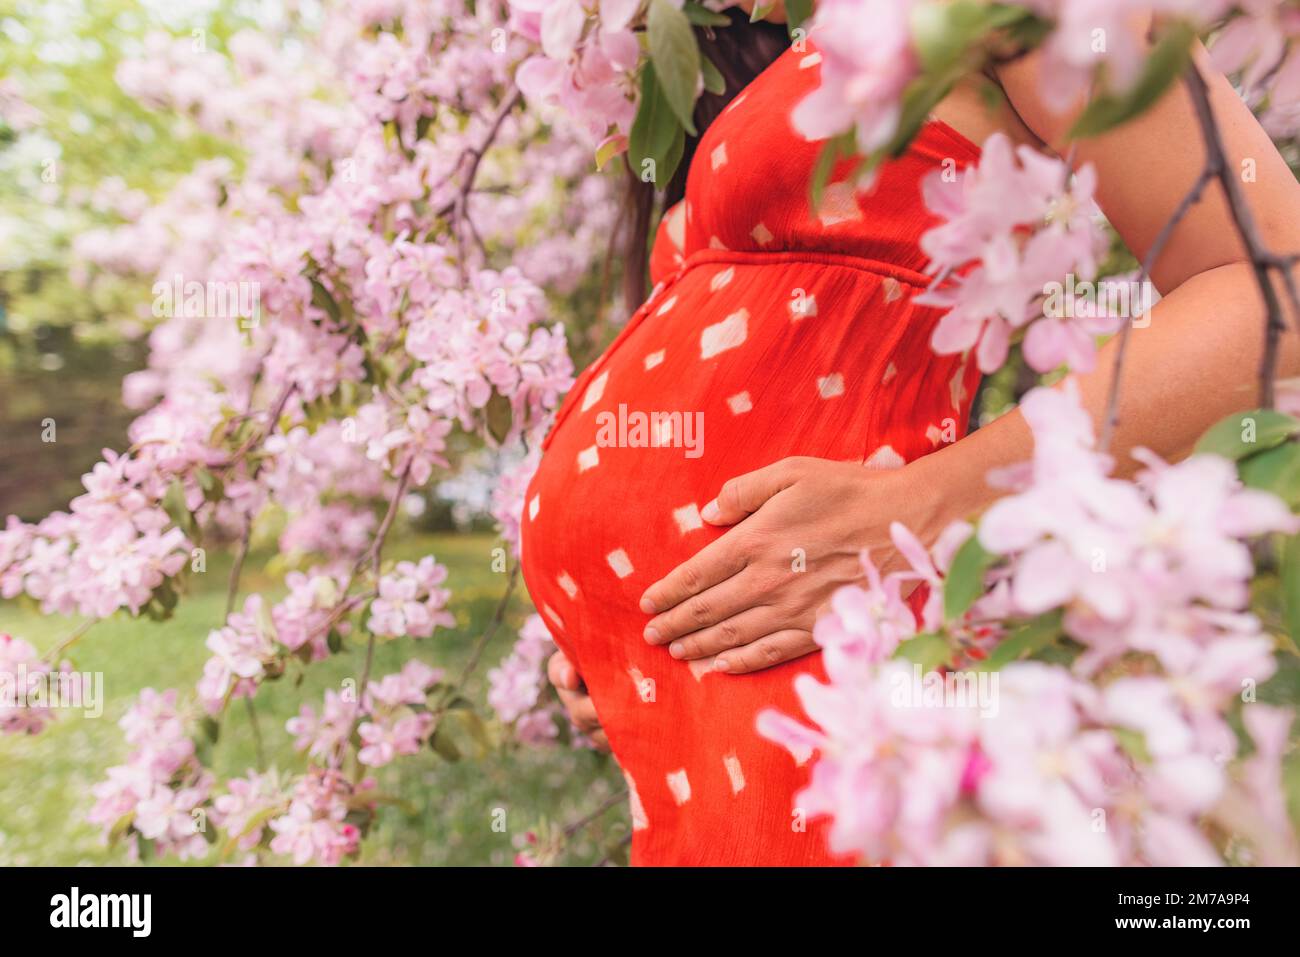 Pregnancy. Pregnant woman portrait in cherry blossom trees pink spring flowers. New season and new life concept. Woman in third trimester expecting Stock Photo